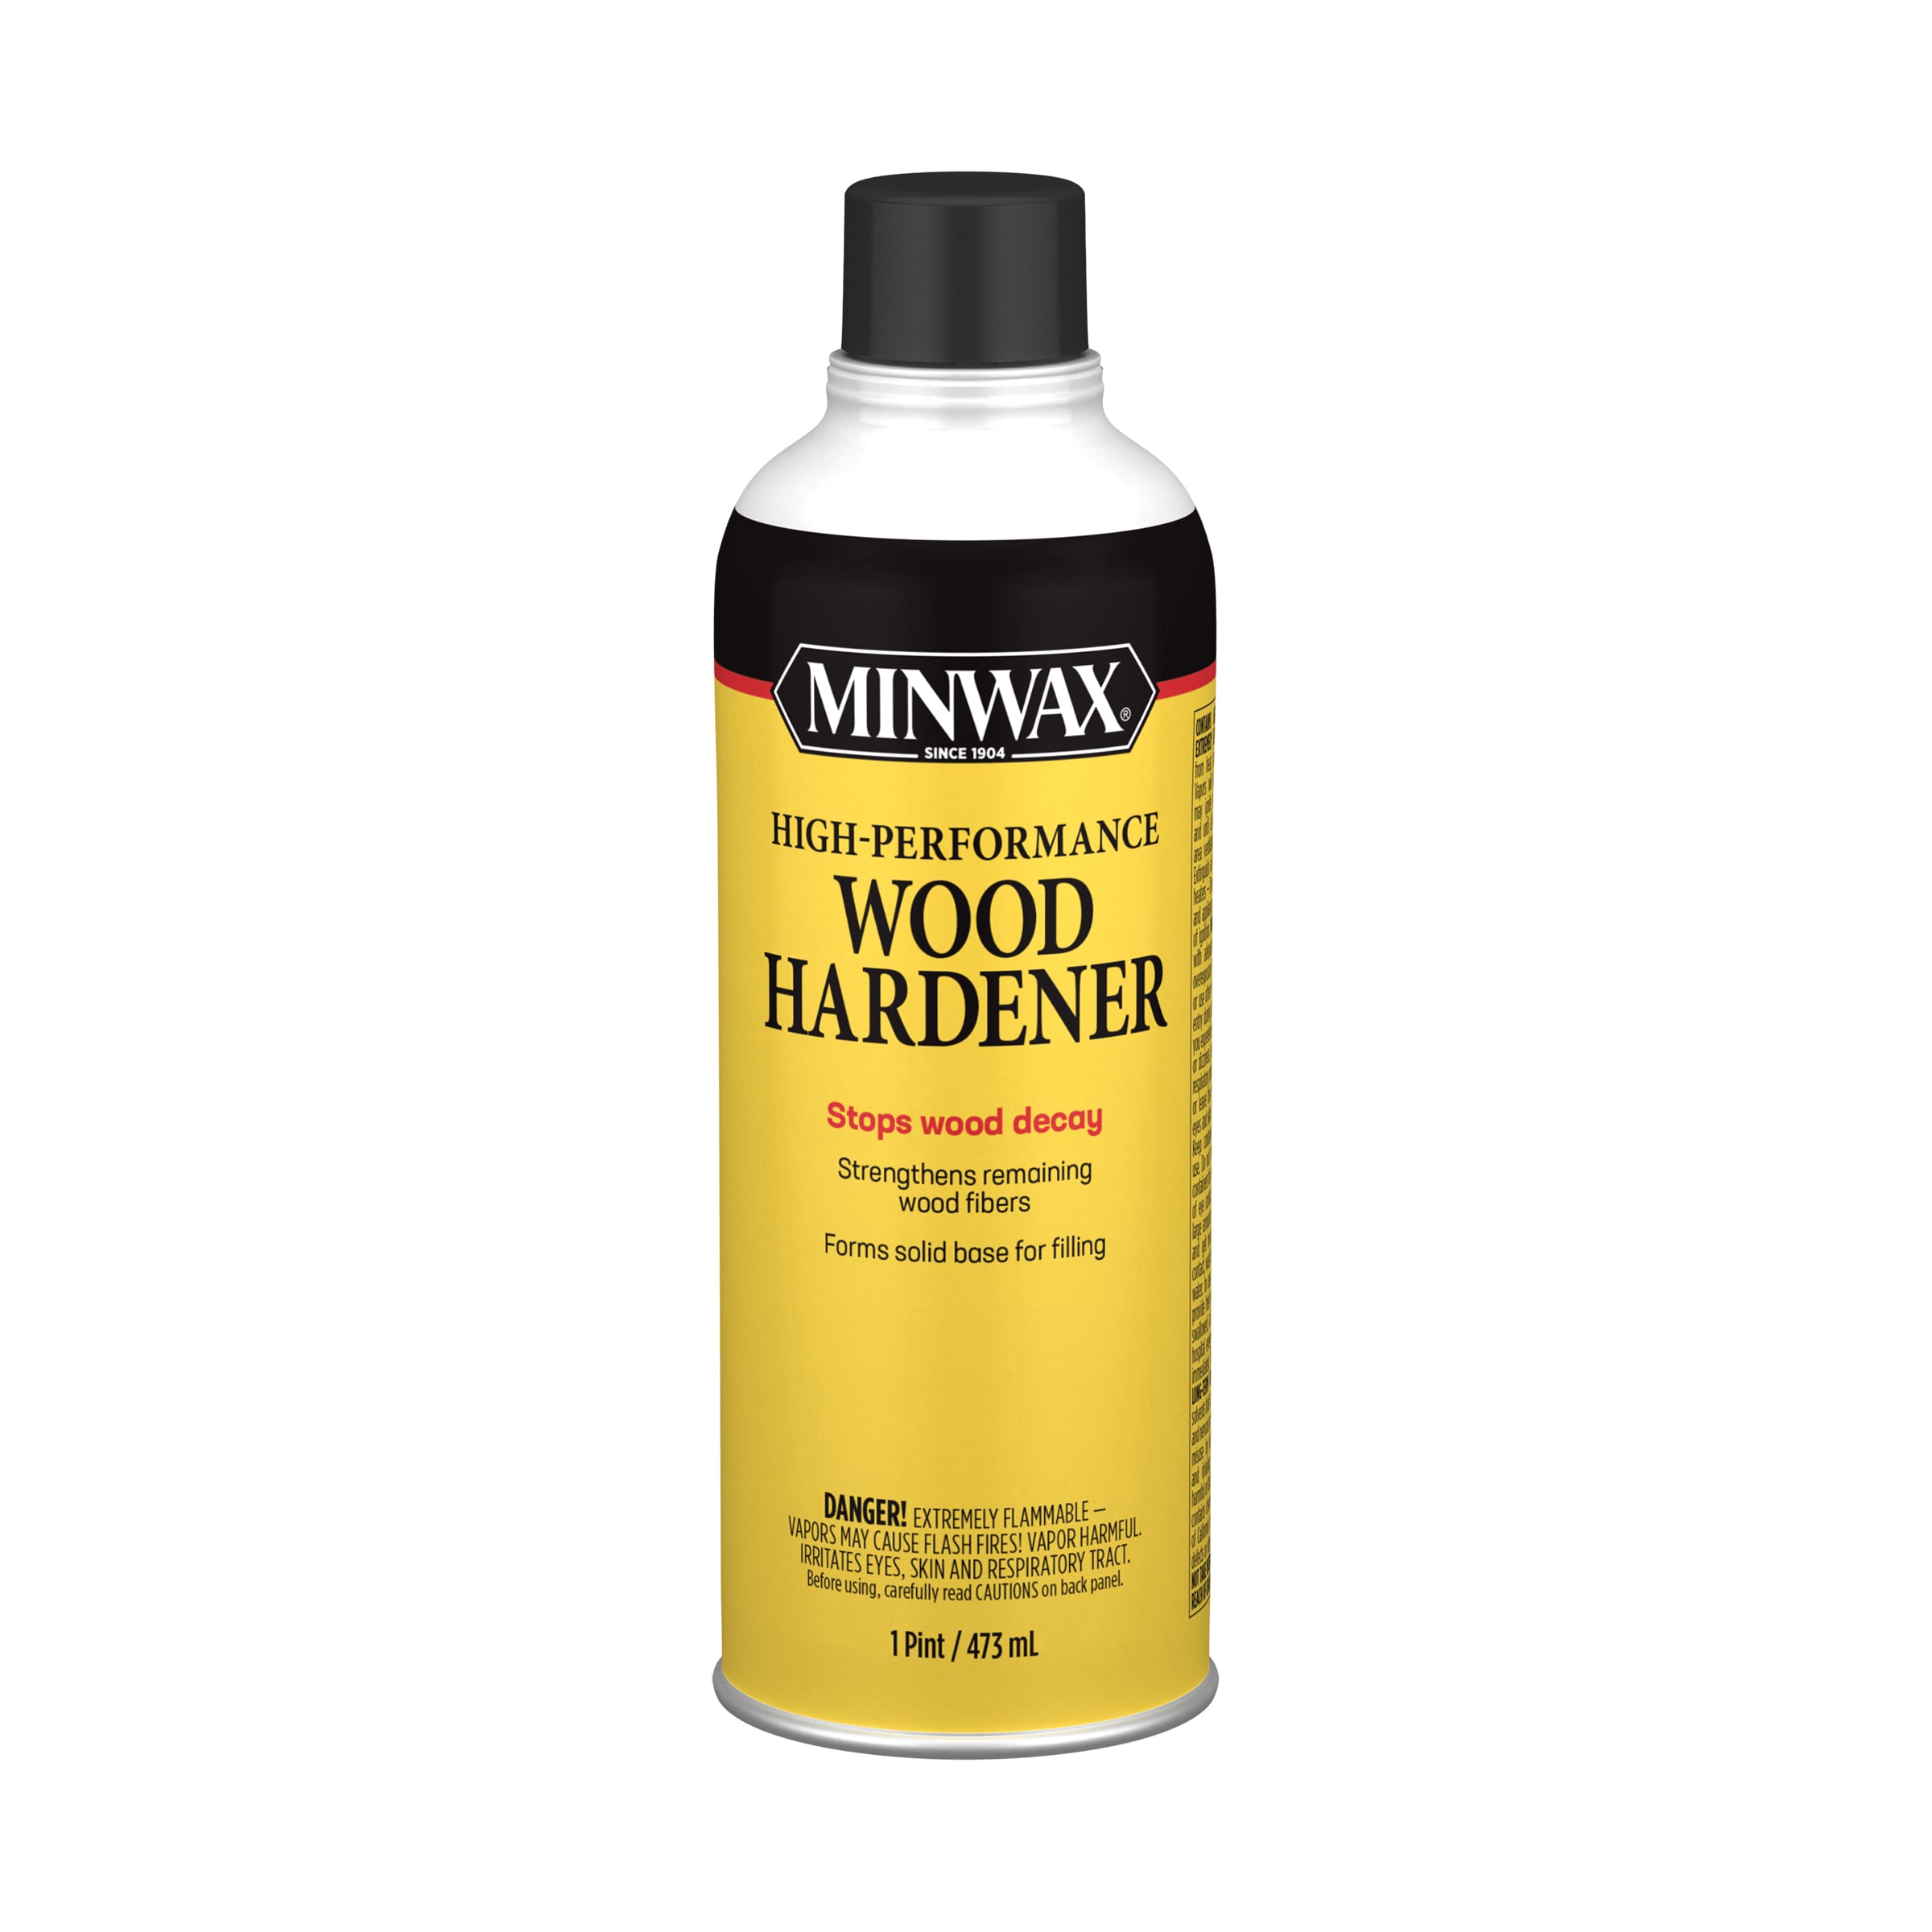 Adhesives For Wood - 68 results